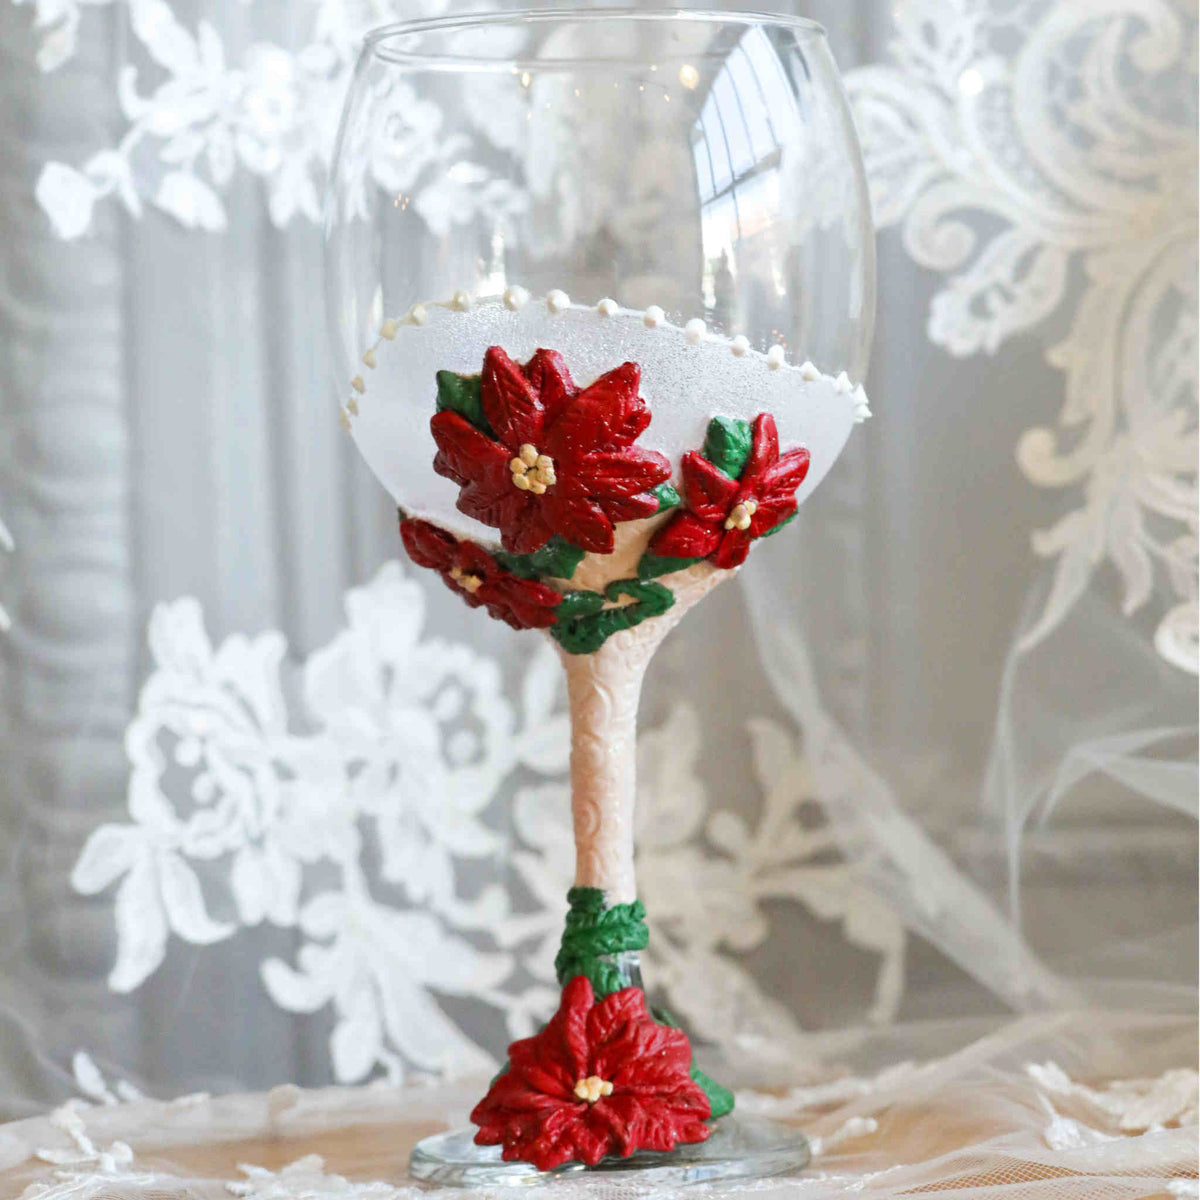 Perfect for any Christmas themed wedding or event, our Poinsettia Wine Glasses are perfect for yourself or as a gift.  Each wine glass sits atop a hand-scuplted polymer clay painted stem of red poinsettias, complimented with soft shimmery magical glitter.